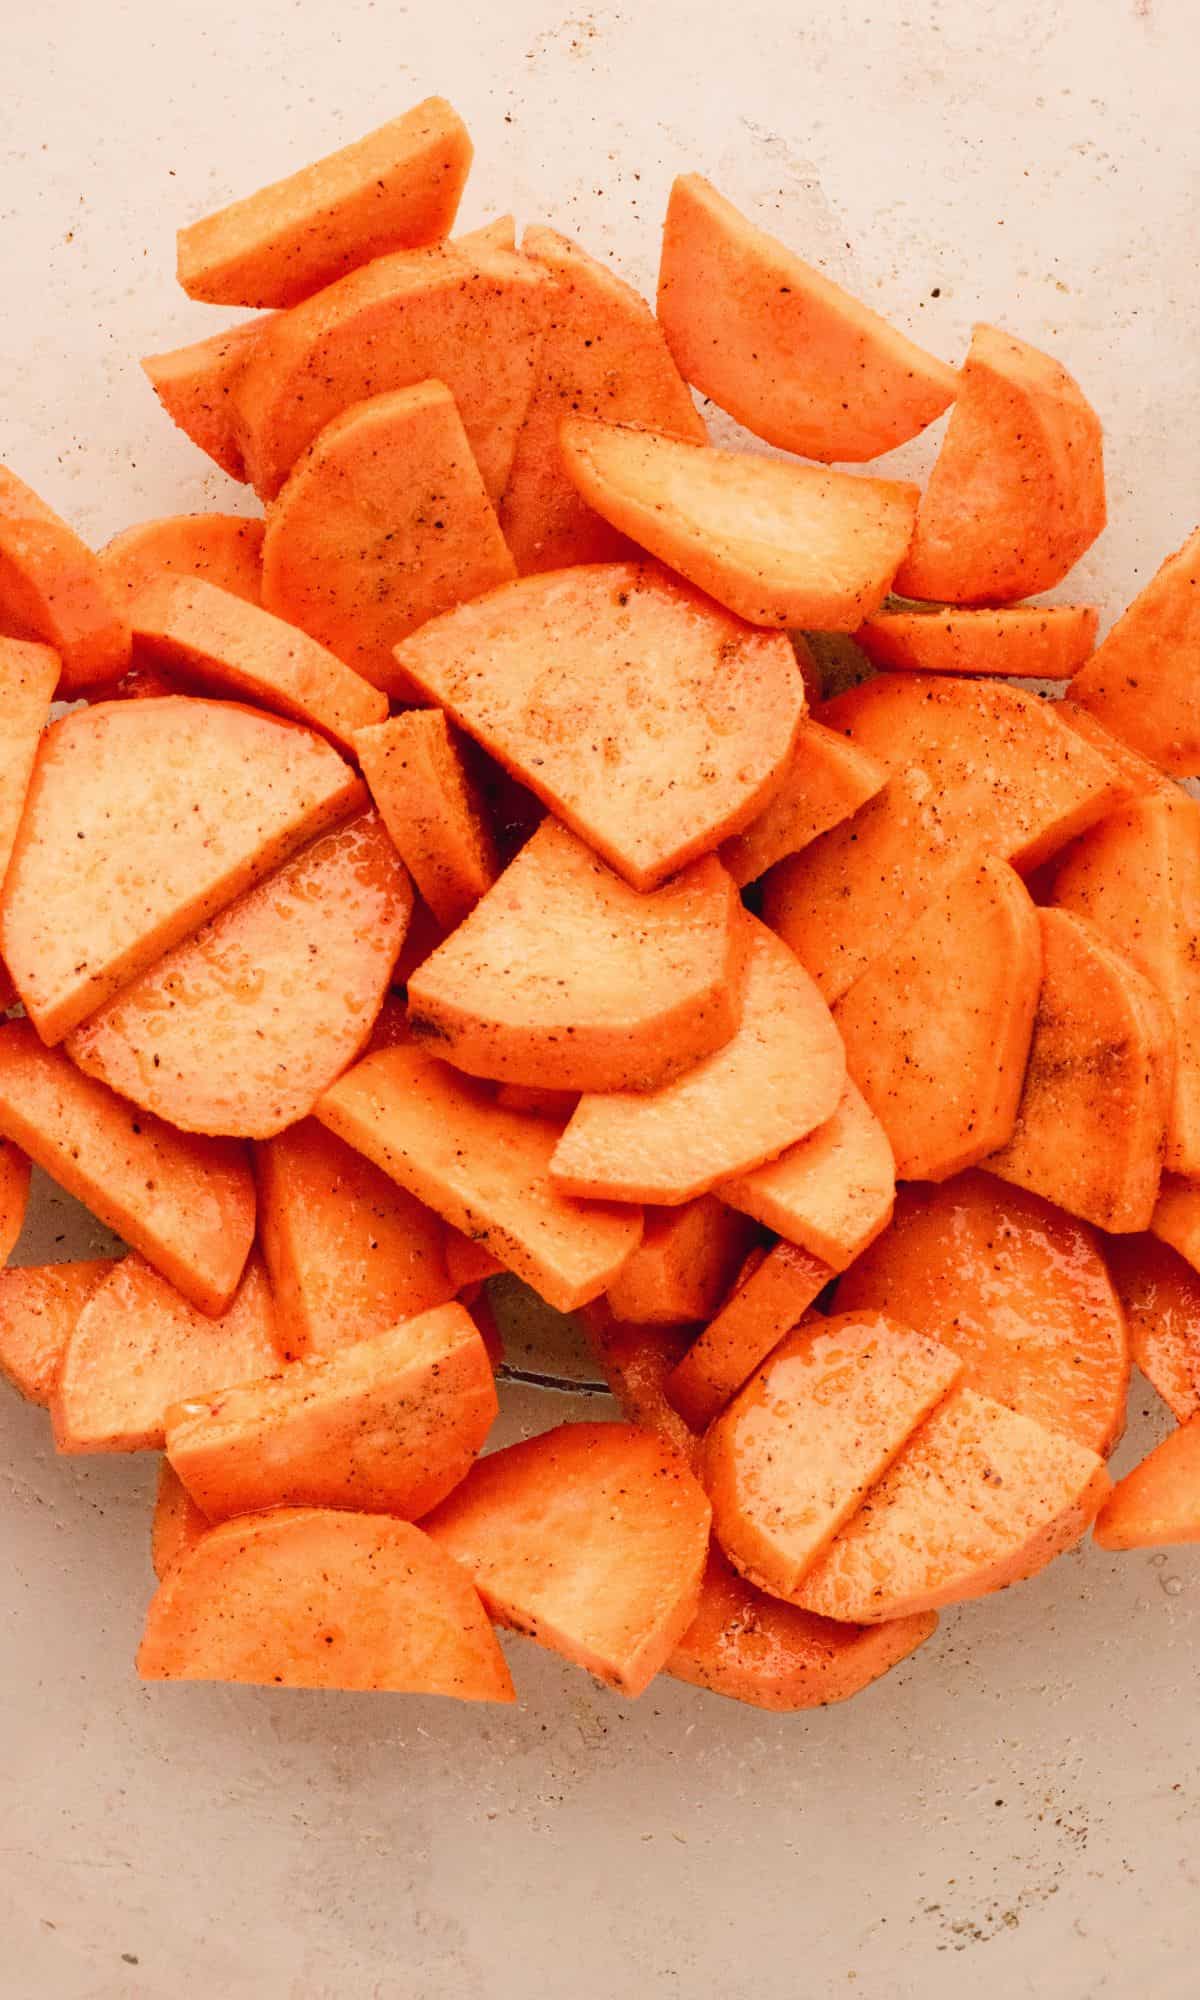 Sliced sweet potatoes in a glass bowl.